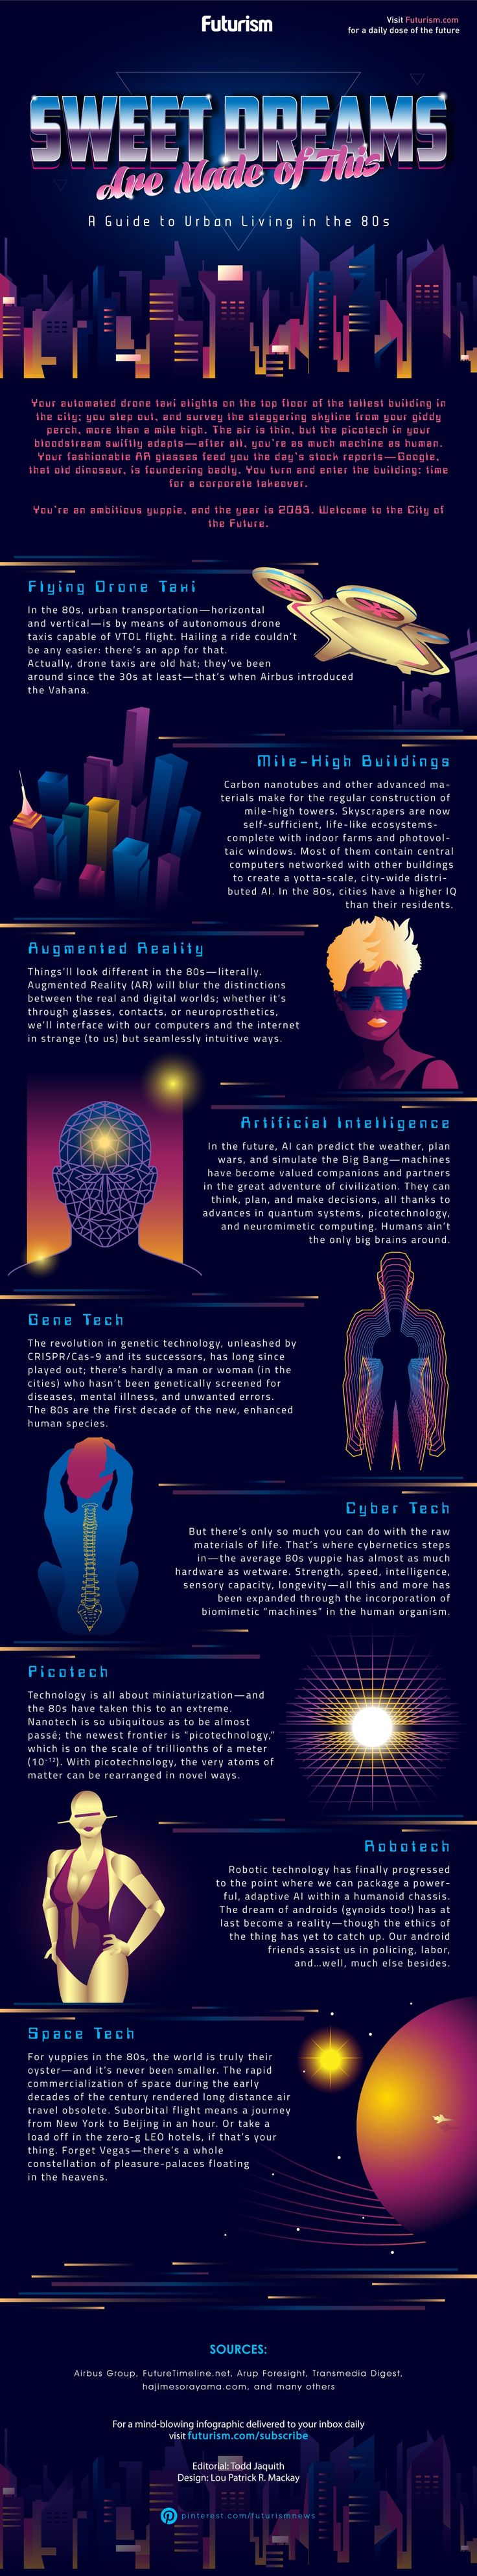 What Does The Future Look Like? - Infographic